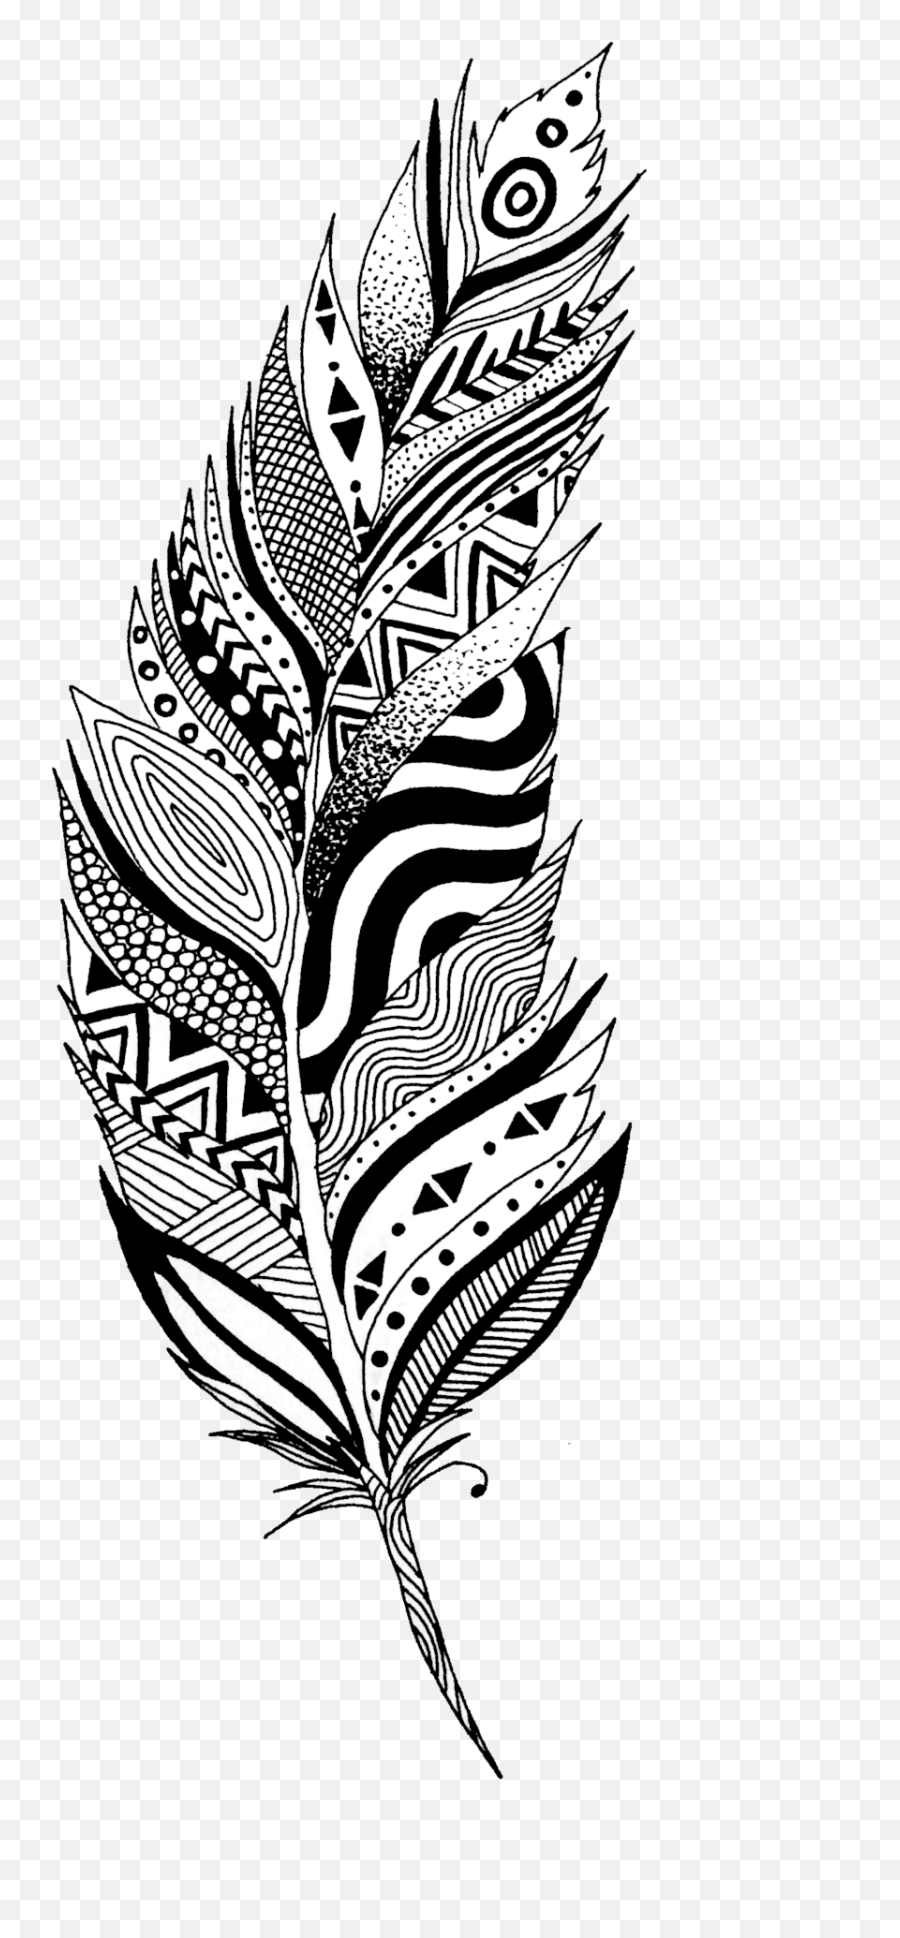 Feather Png Transparent Image Arts - Black And White Feather Drawing,Feather Transparent Background